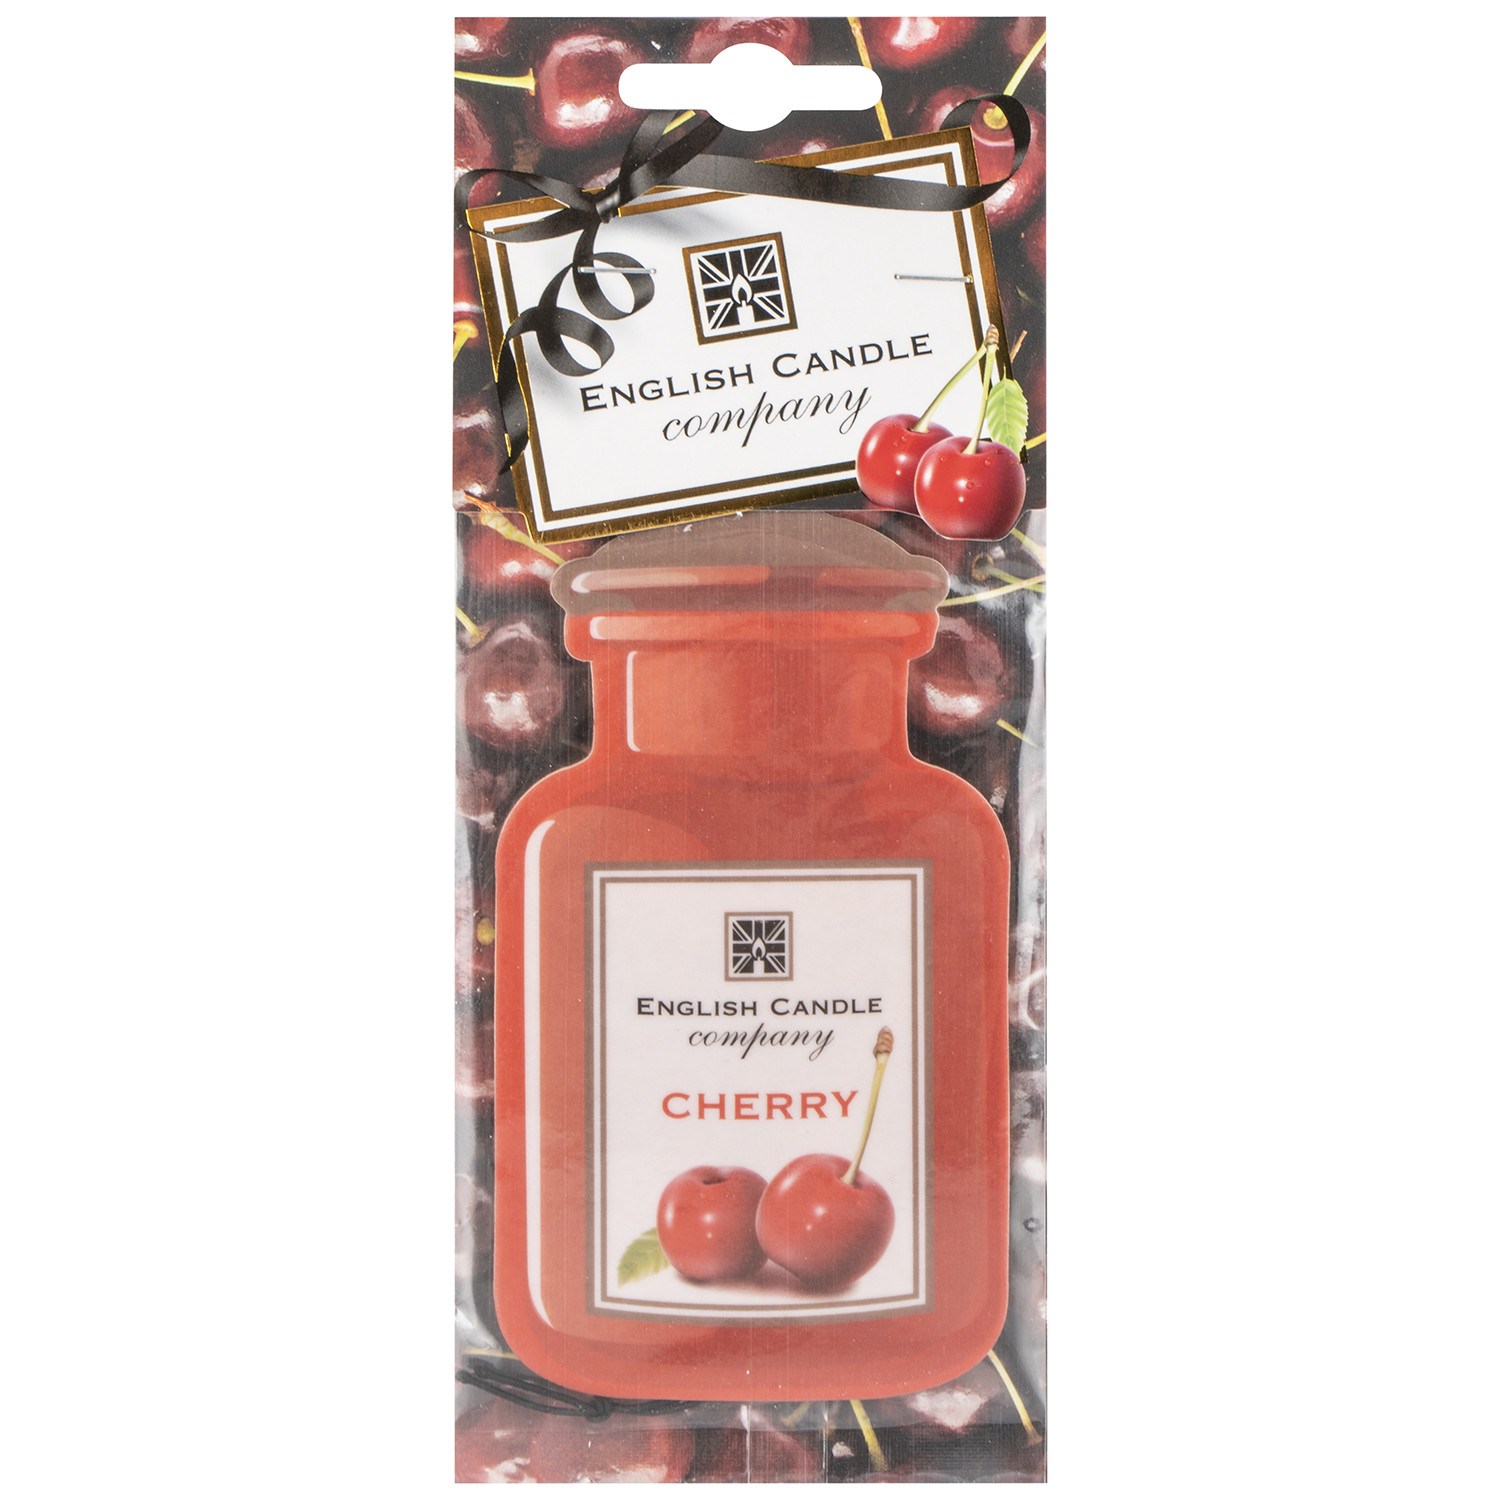 English Candle Company Cherry 2D Car Air Freshener Image 1